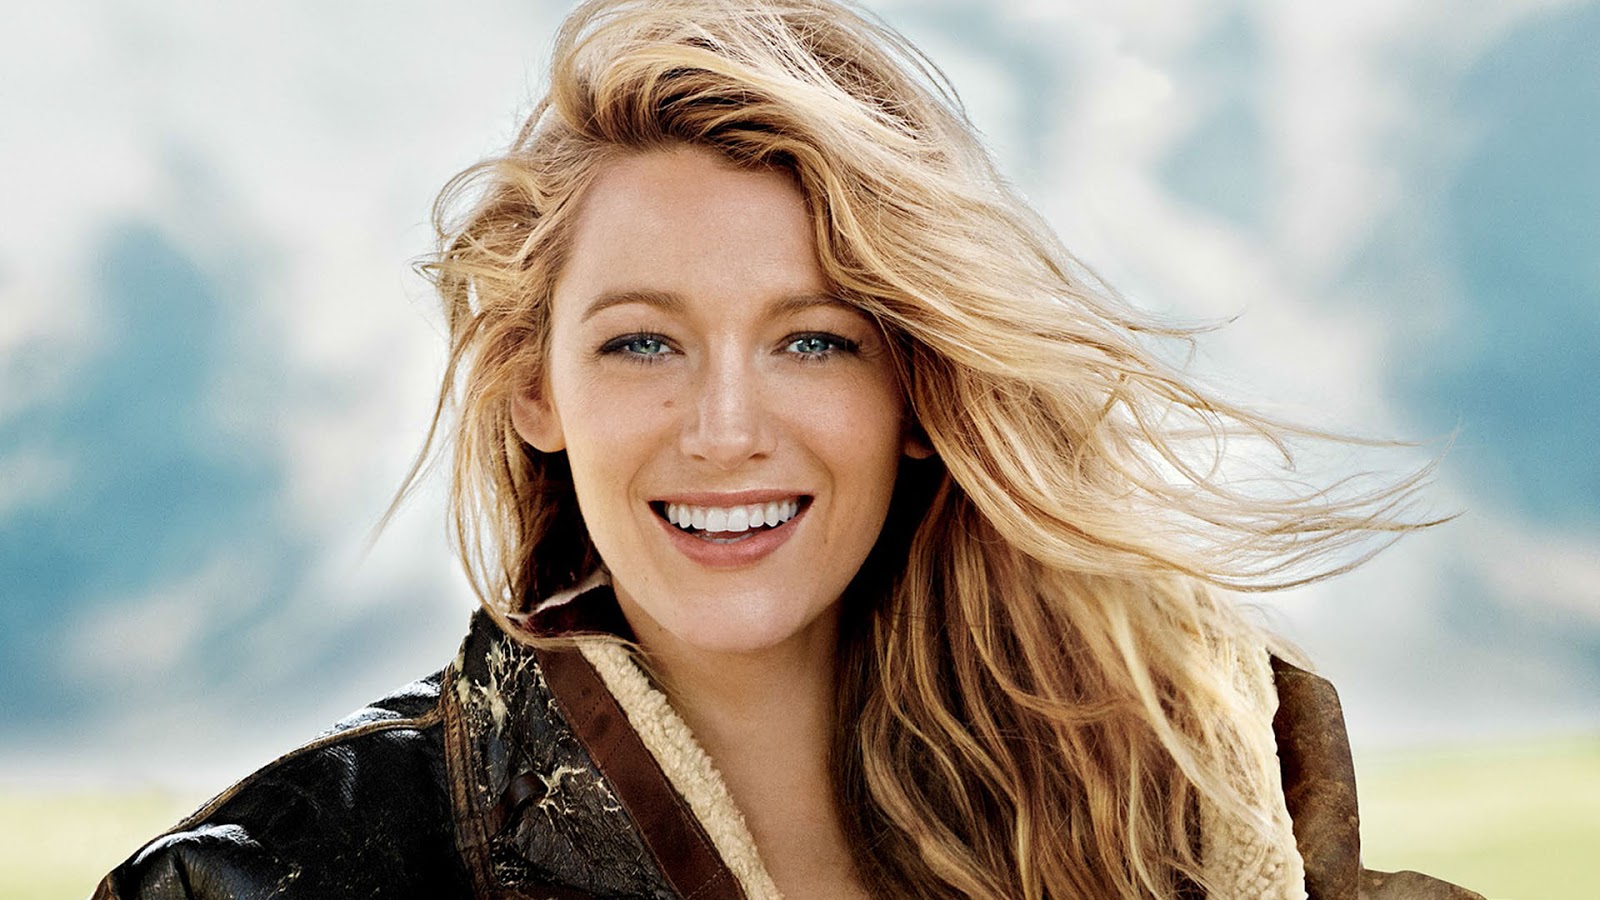 Blake Lively HD Images and Wallpapers - Hollywood Actress